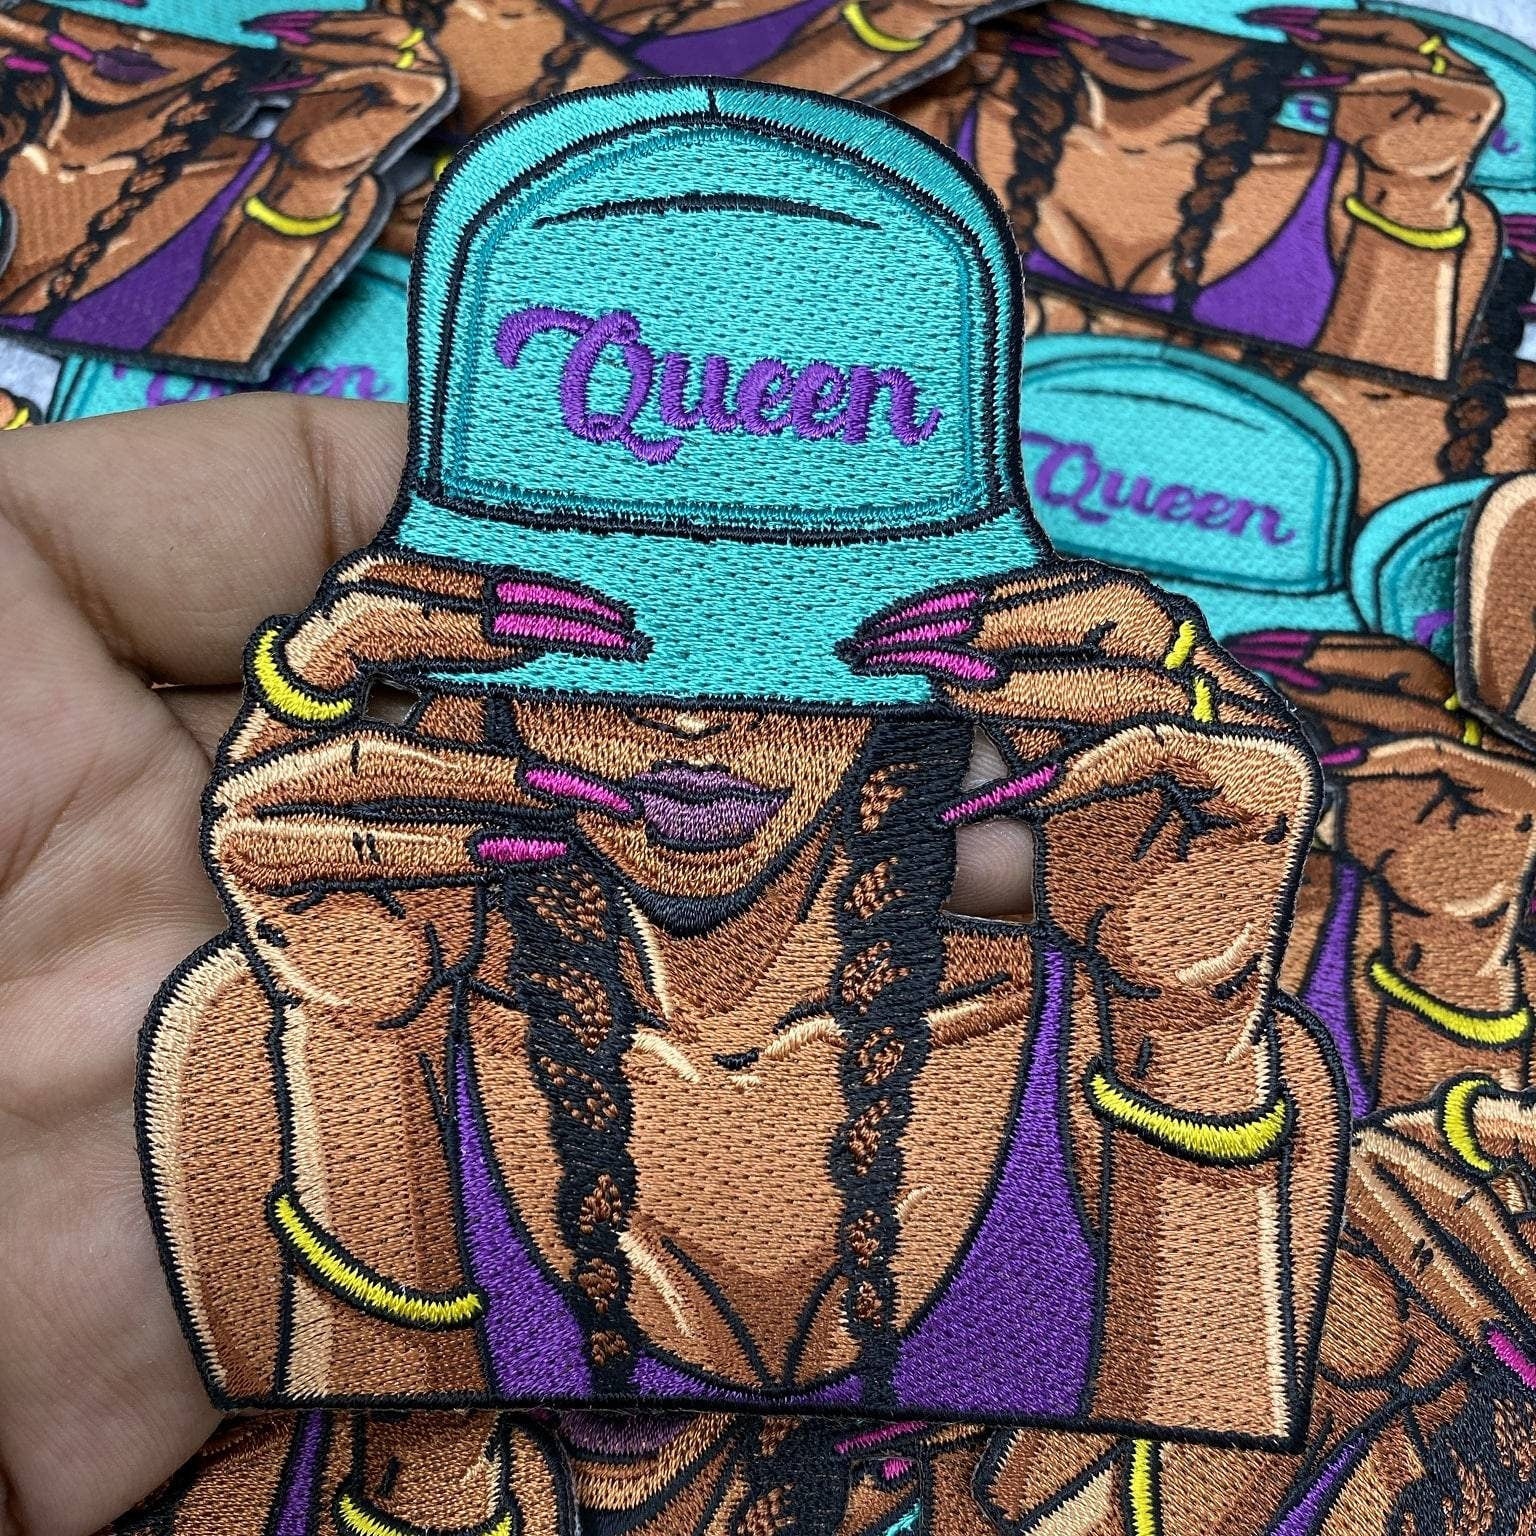 New Arrival, Turquoise Hat "Queen" Iron-on Patch, Embroidered Afrocentric Patch| Beautiful Black Queen|Jacket Patch|DIY Applique| Size 4"